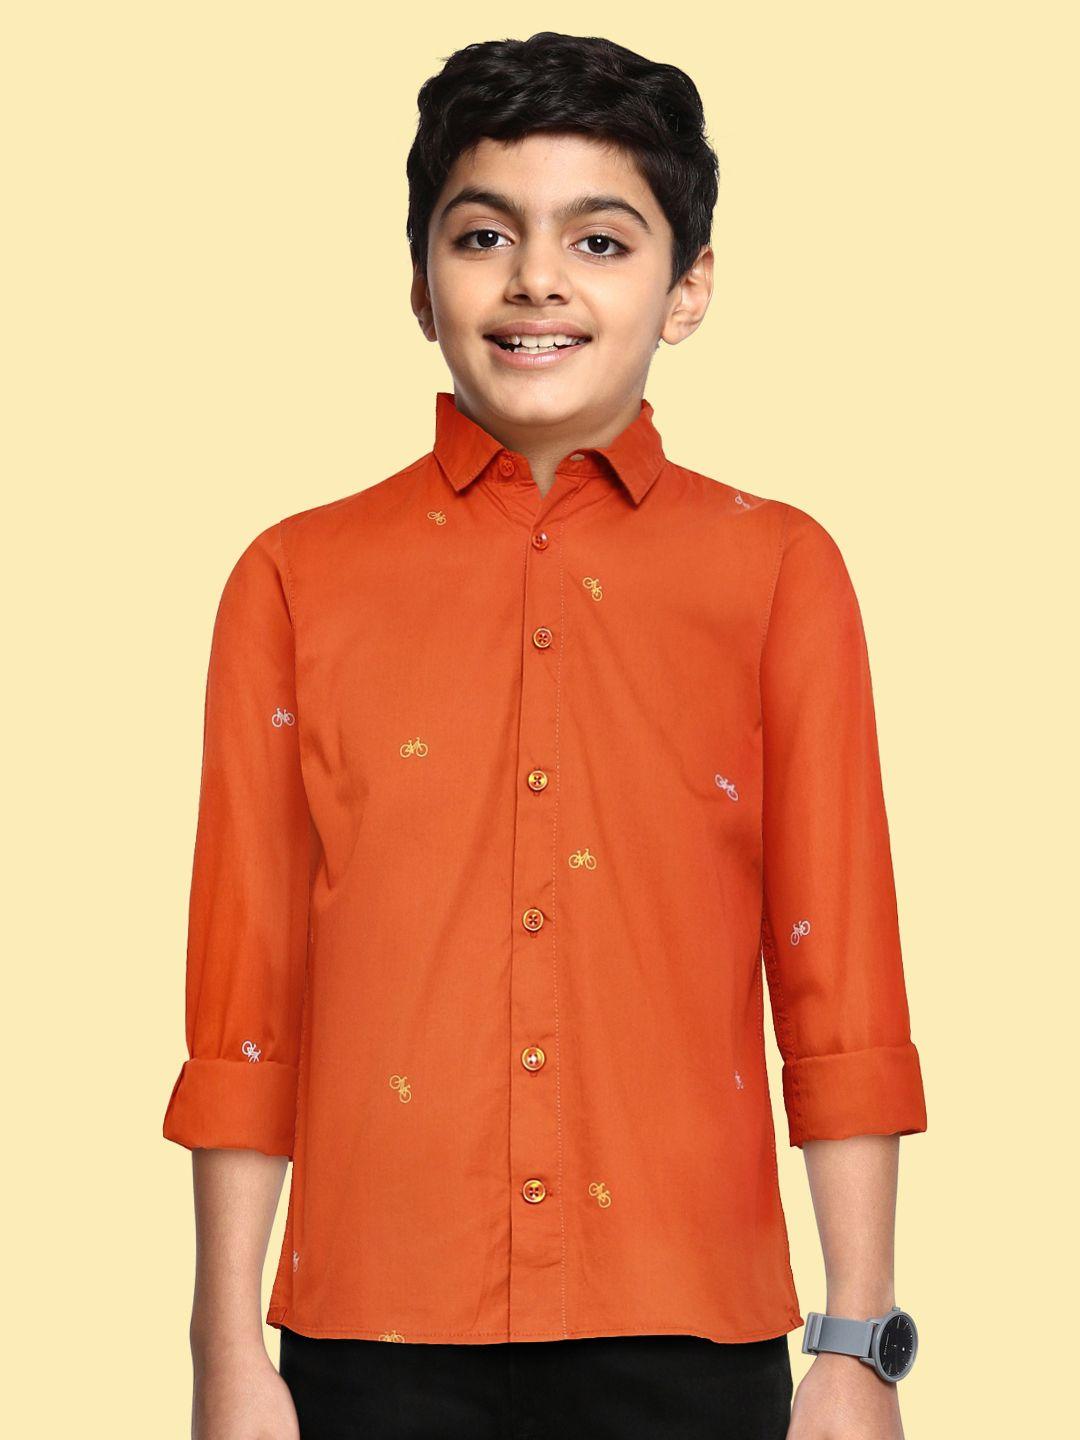 m&h juniors boys rust brown conversational opaque printed pure cotton casual shirt